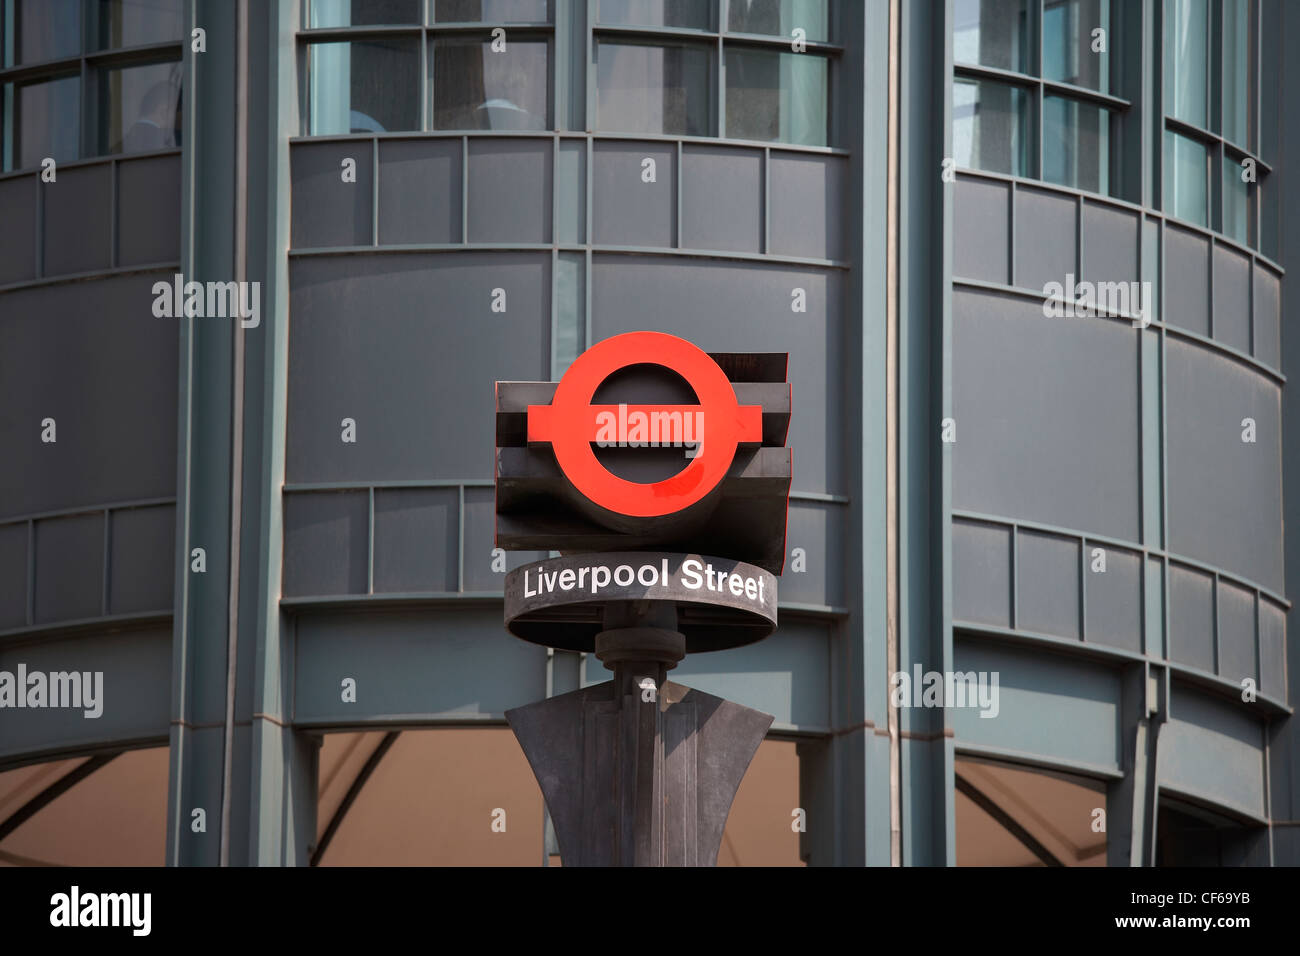 A detailed view of the London Liverpool Street train station logo. Stock Photo